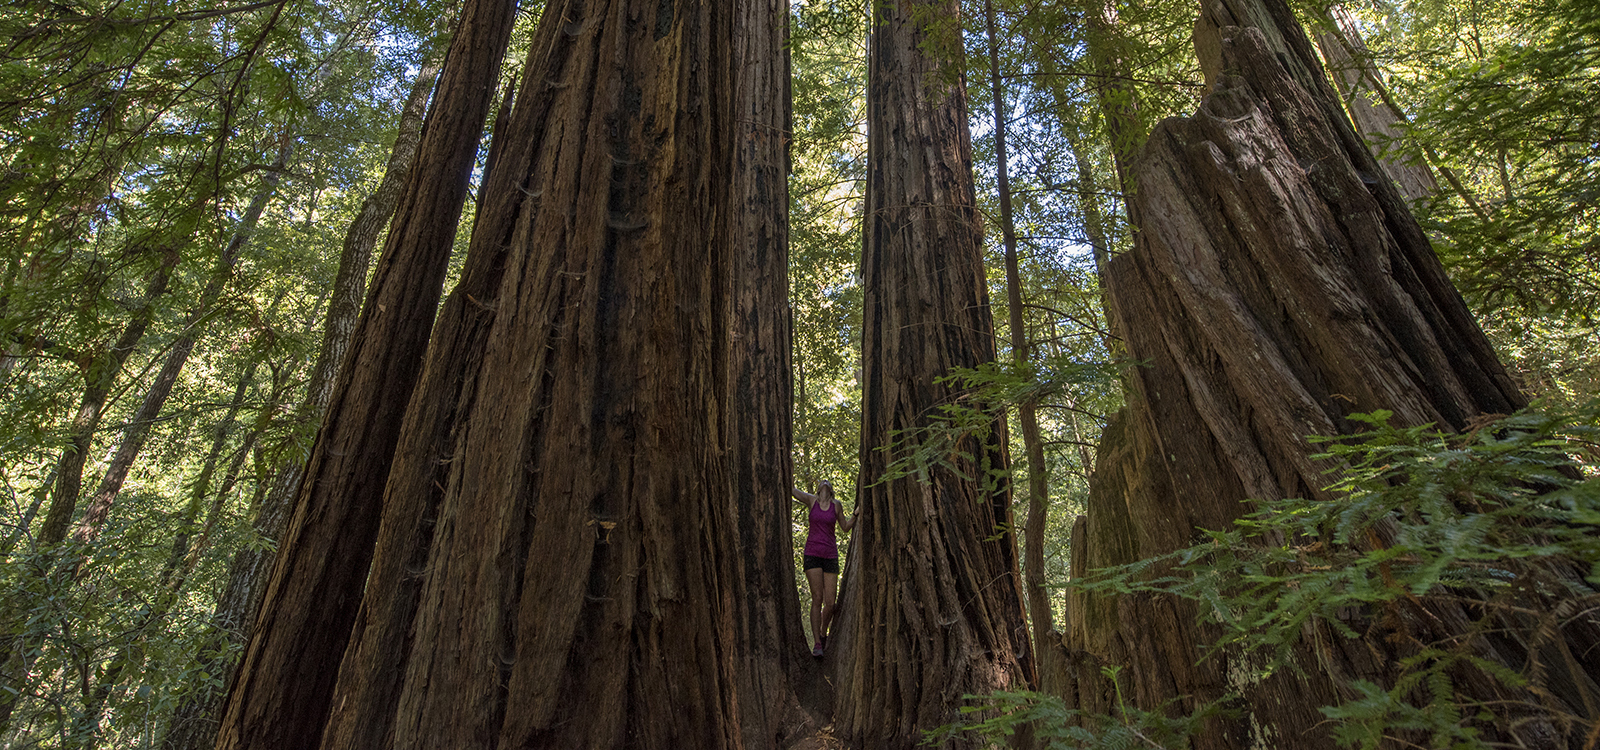 A girl looking up at the massive towering redwood trees at Big Basin State Park